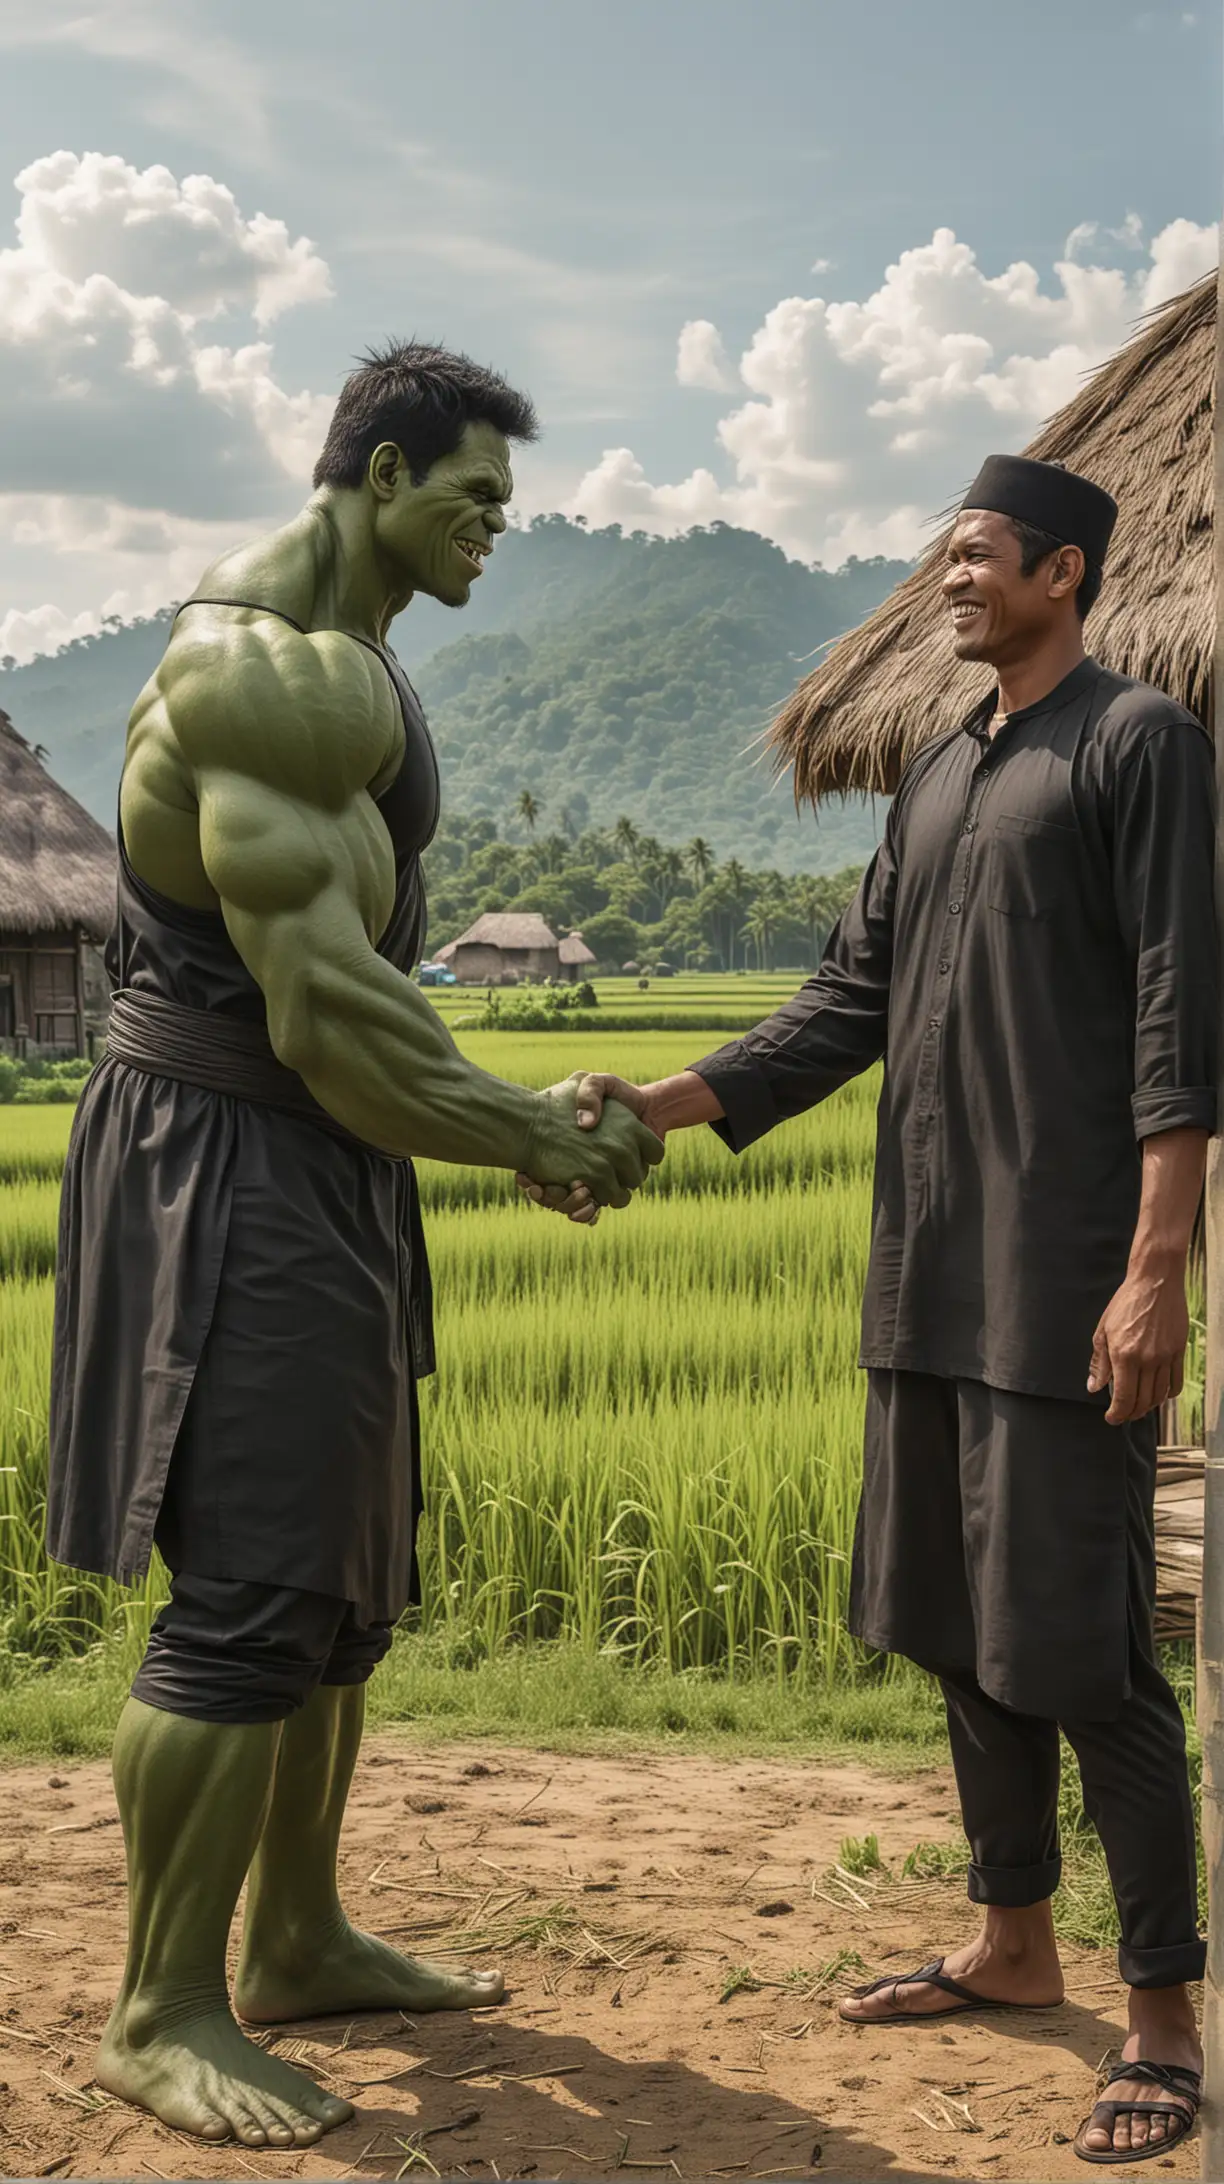 Handshake Between a Muslim Man from Indonesia and the Hulk in a Village Setting